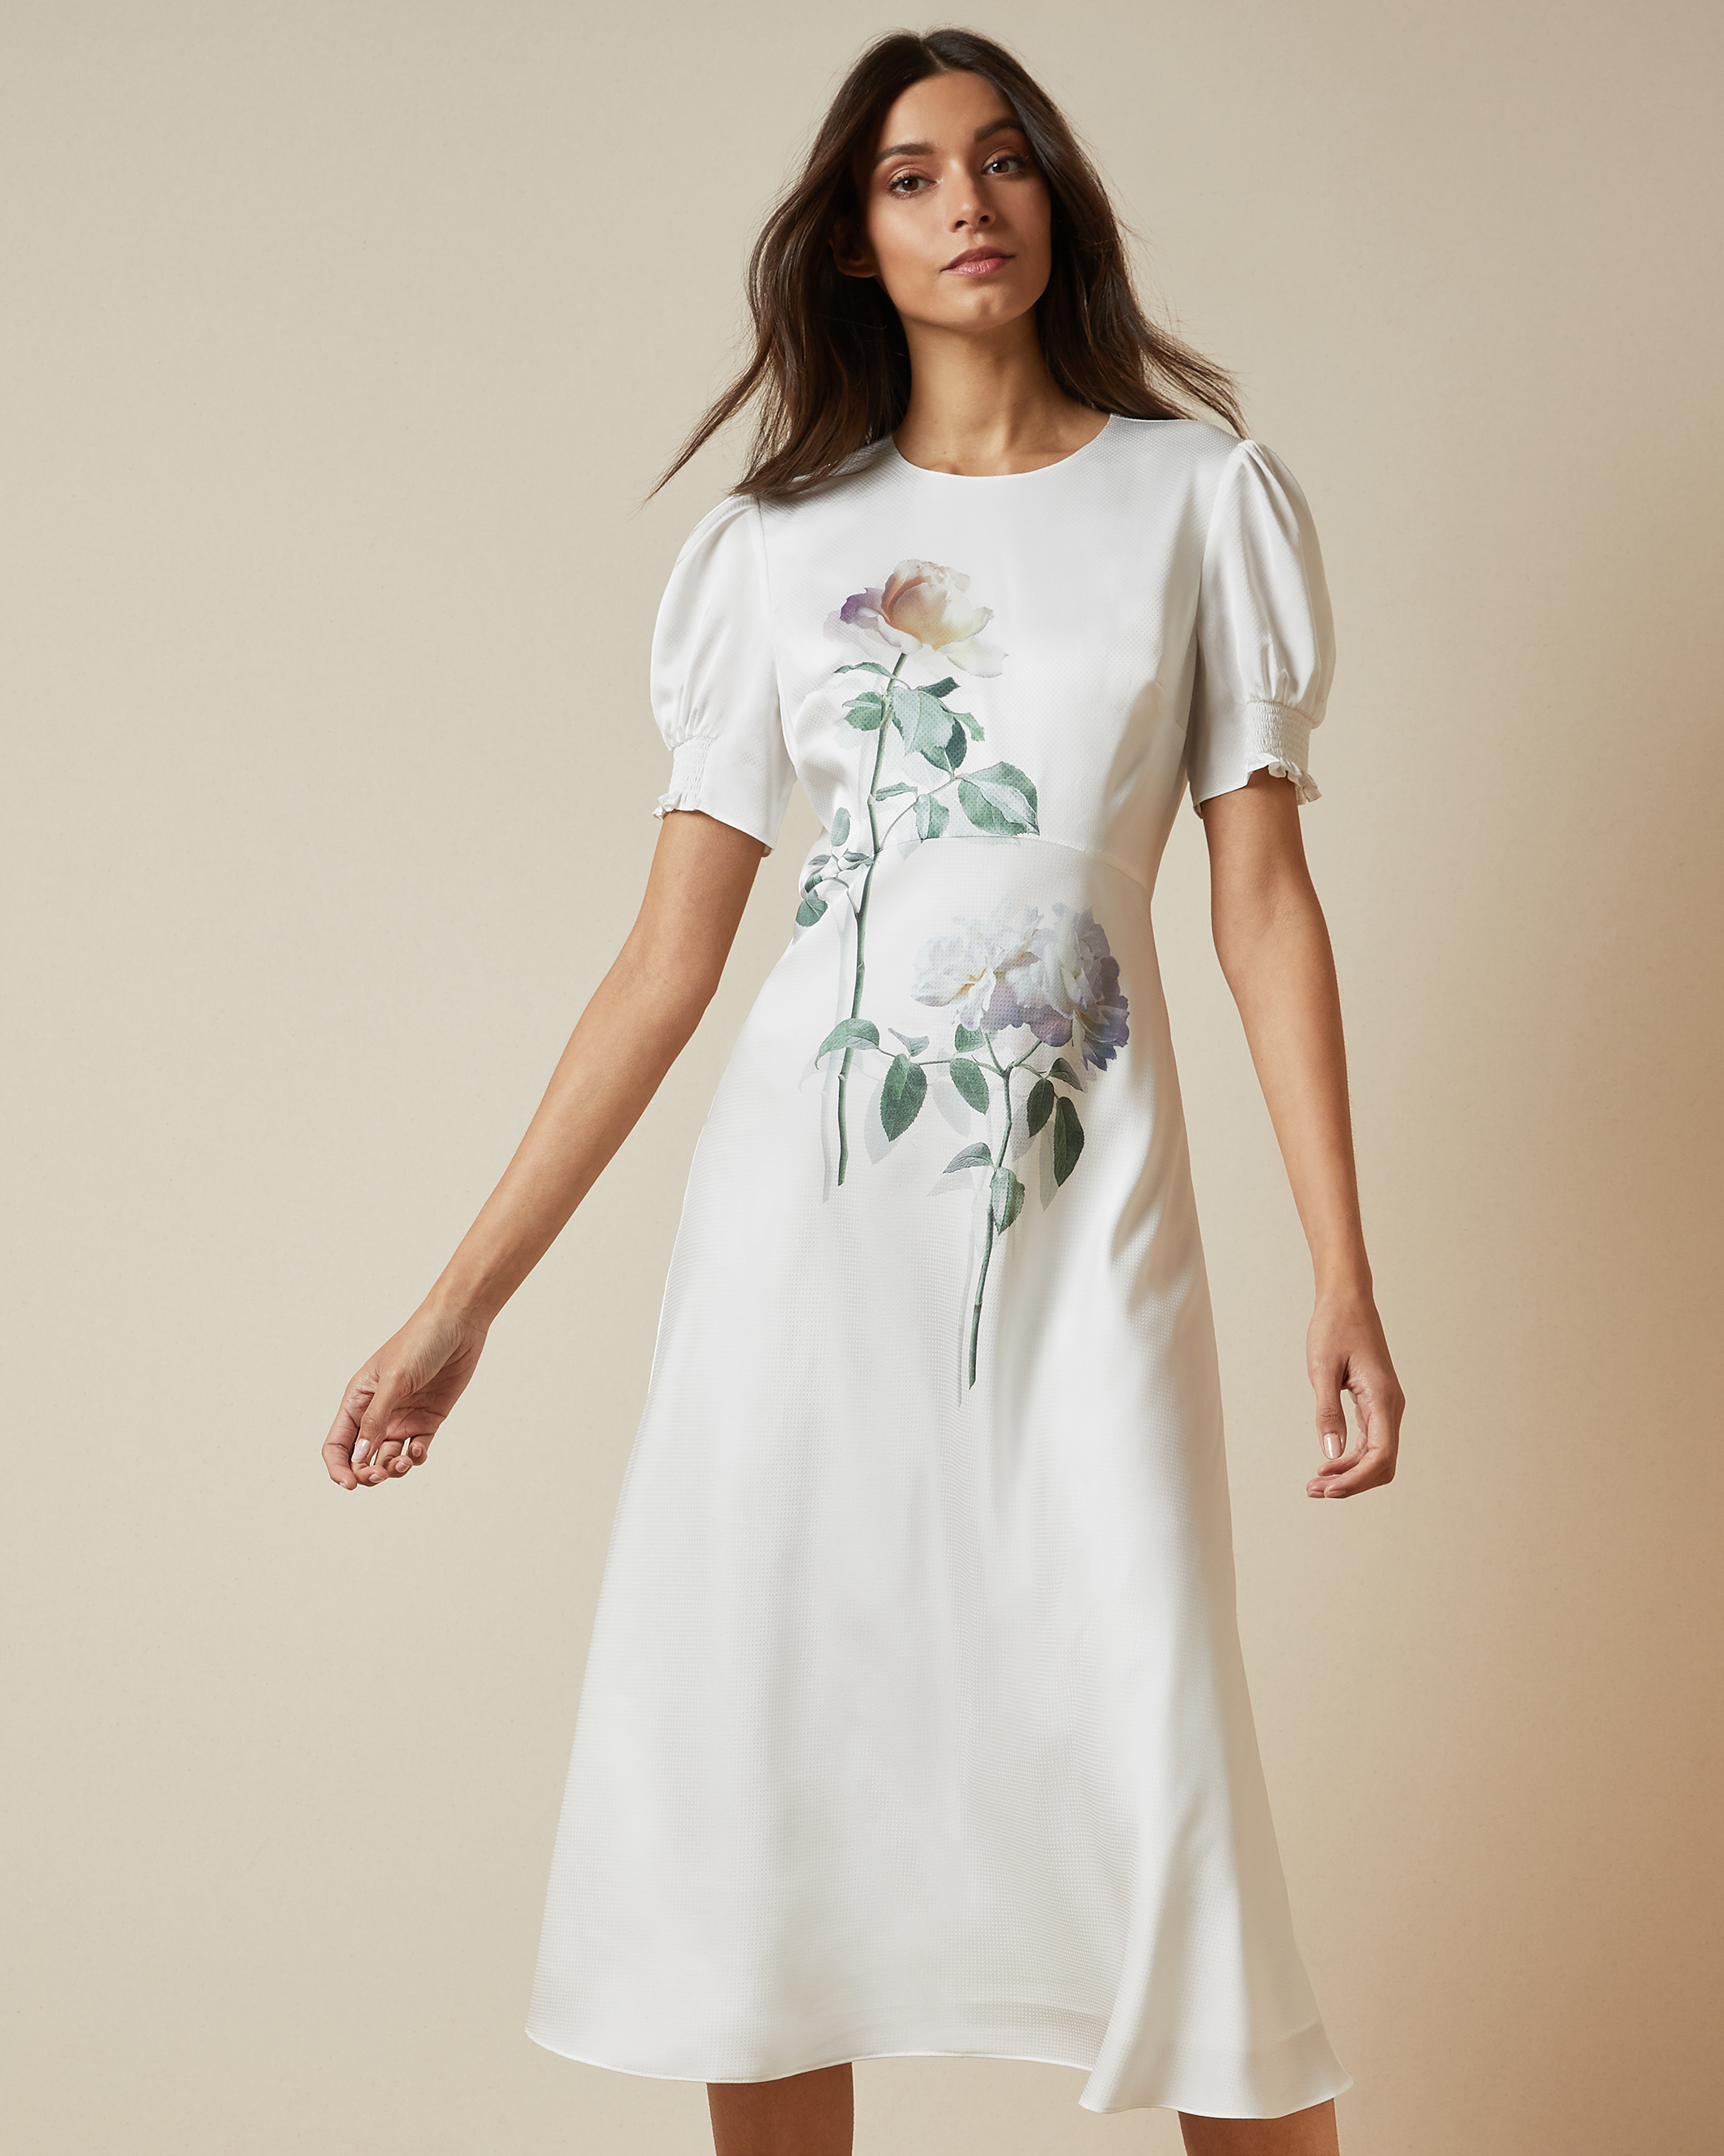 bridal dresses for mother of the bride